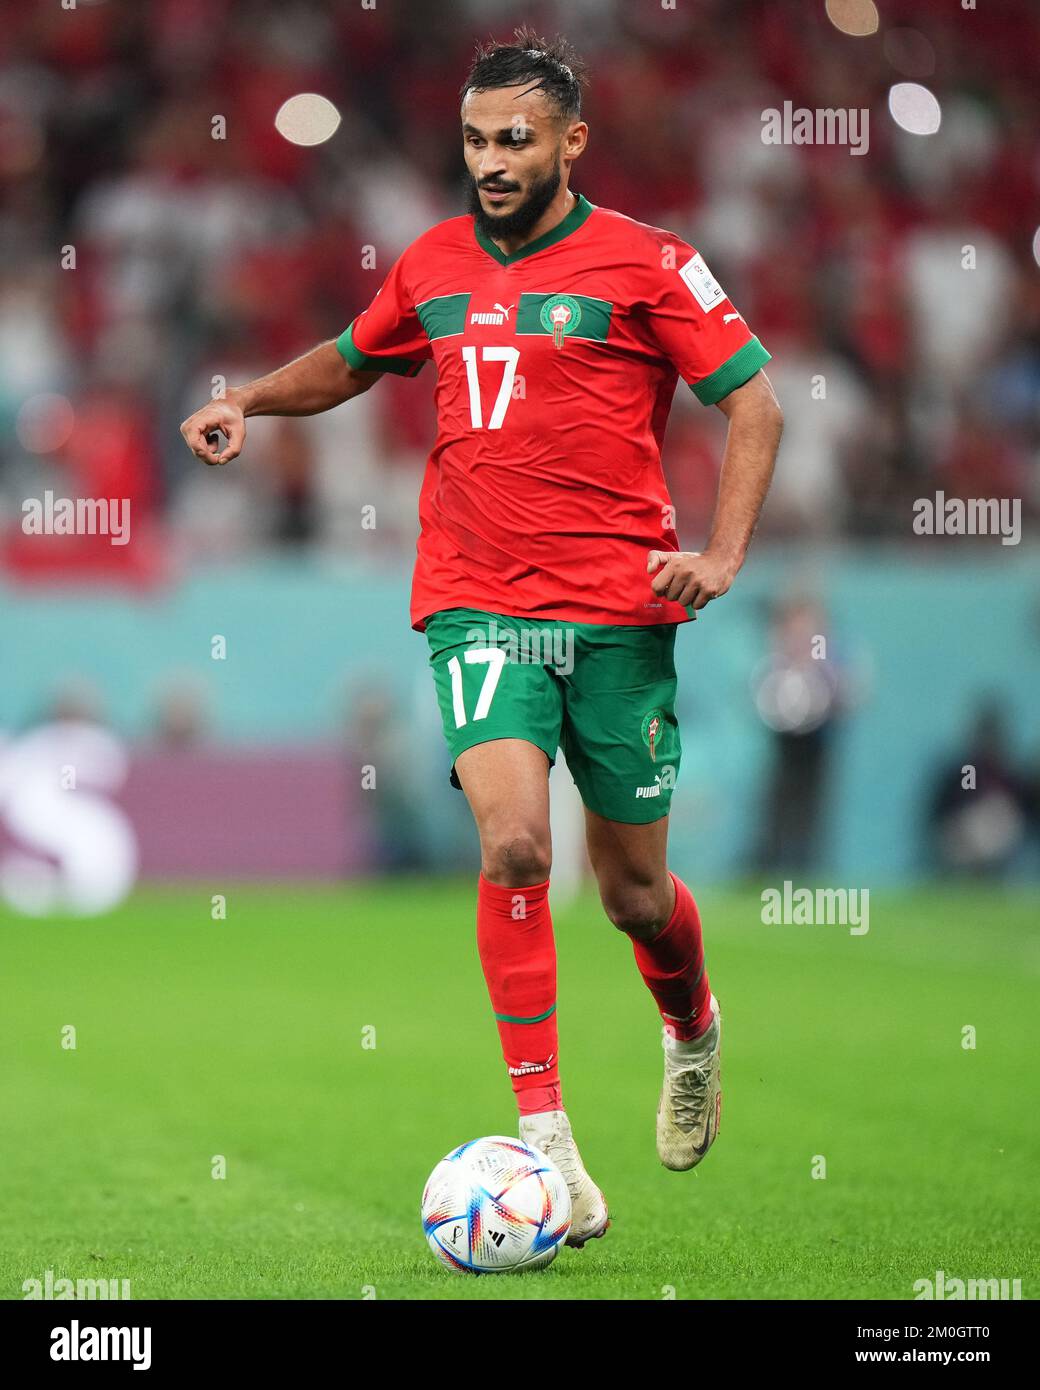 Sofiane Boufal of Morocco during the FIFA World Cup Qatar 2022 match, Round of 16, between Morocco v Spain played at Education City Stadium on Dec 6, 2022 in Doha, Qatar